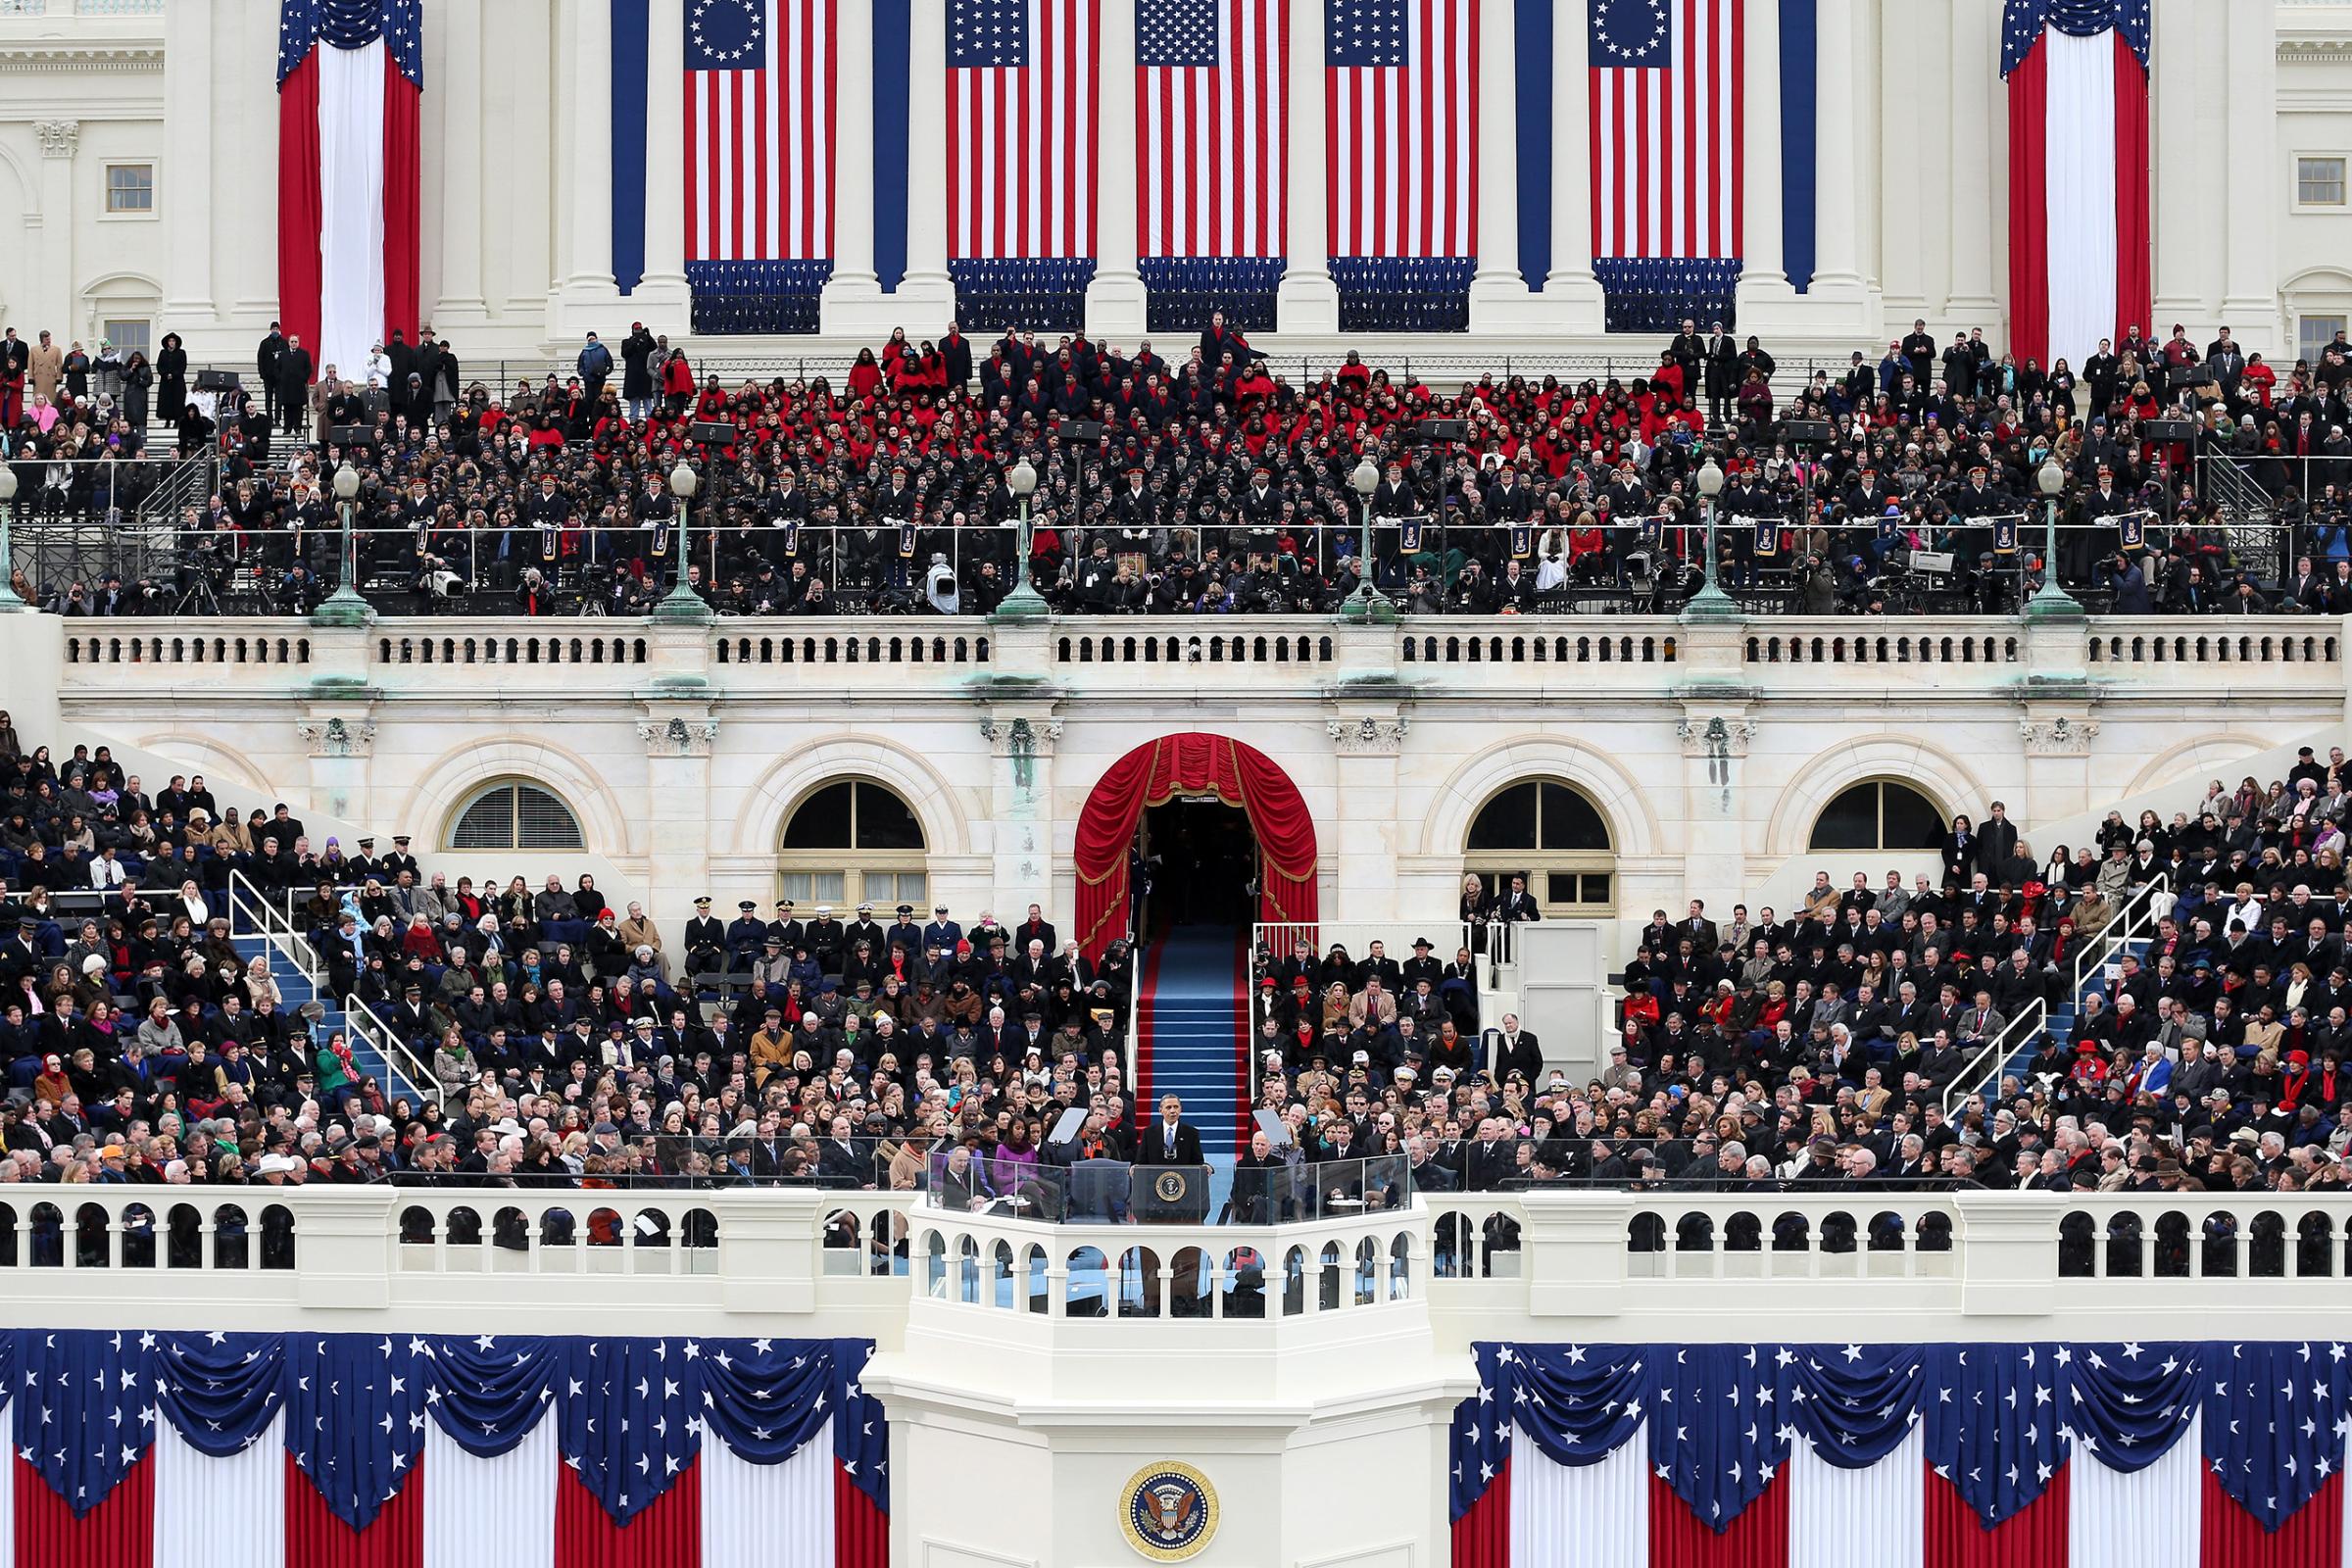 President Barack Obama gives his inauguration address during the public ceremonial inauguration on the West Front of the U.S. Capitol January 21, 2013 in Washington, DC.